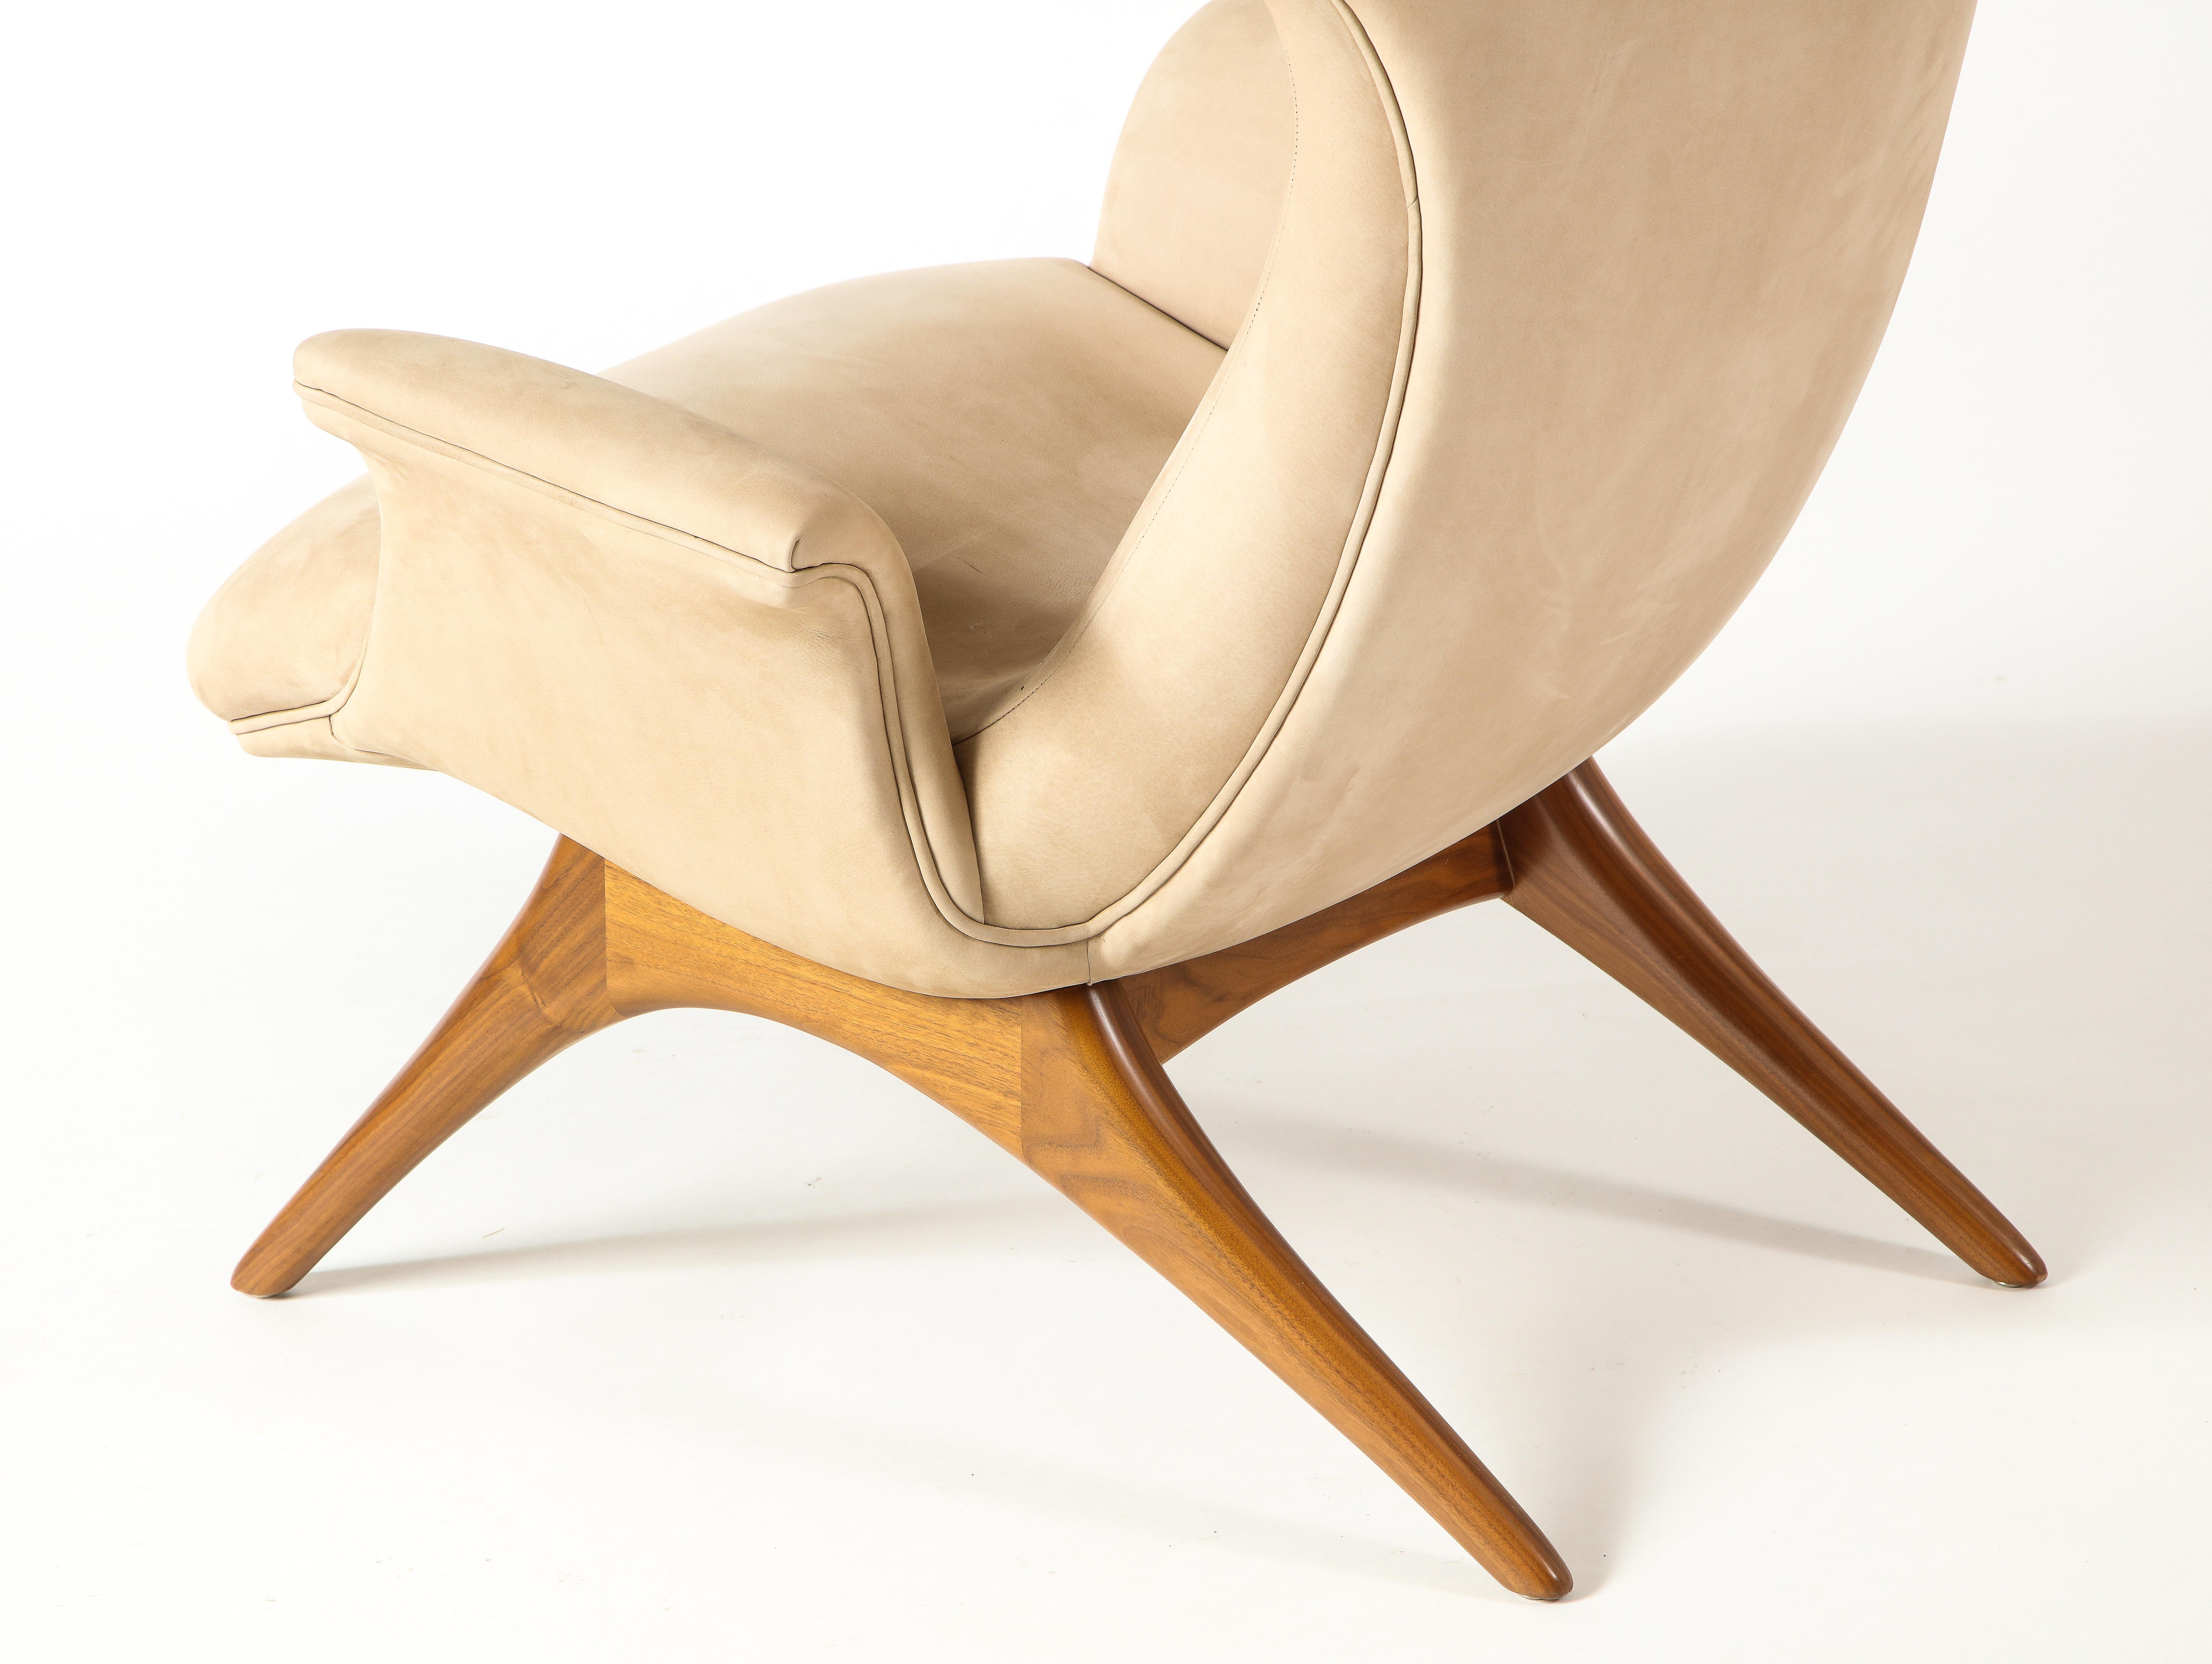 Vladimir Kagan Ondine Chair with Sueded Leather Upholstery & Natural Walnut Base 2